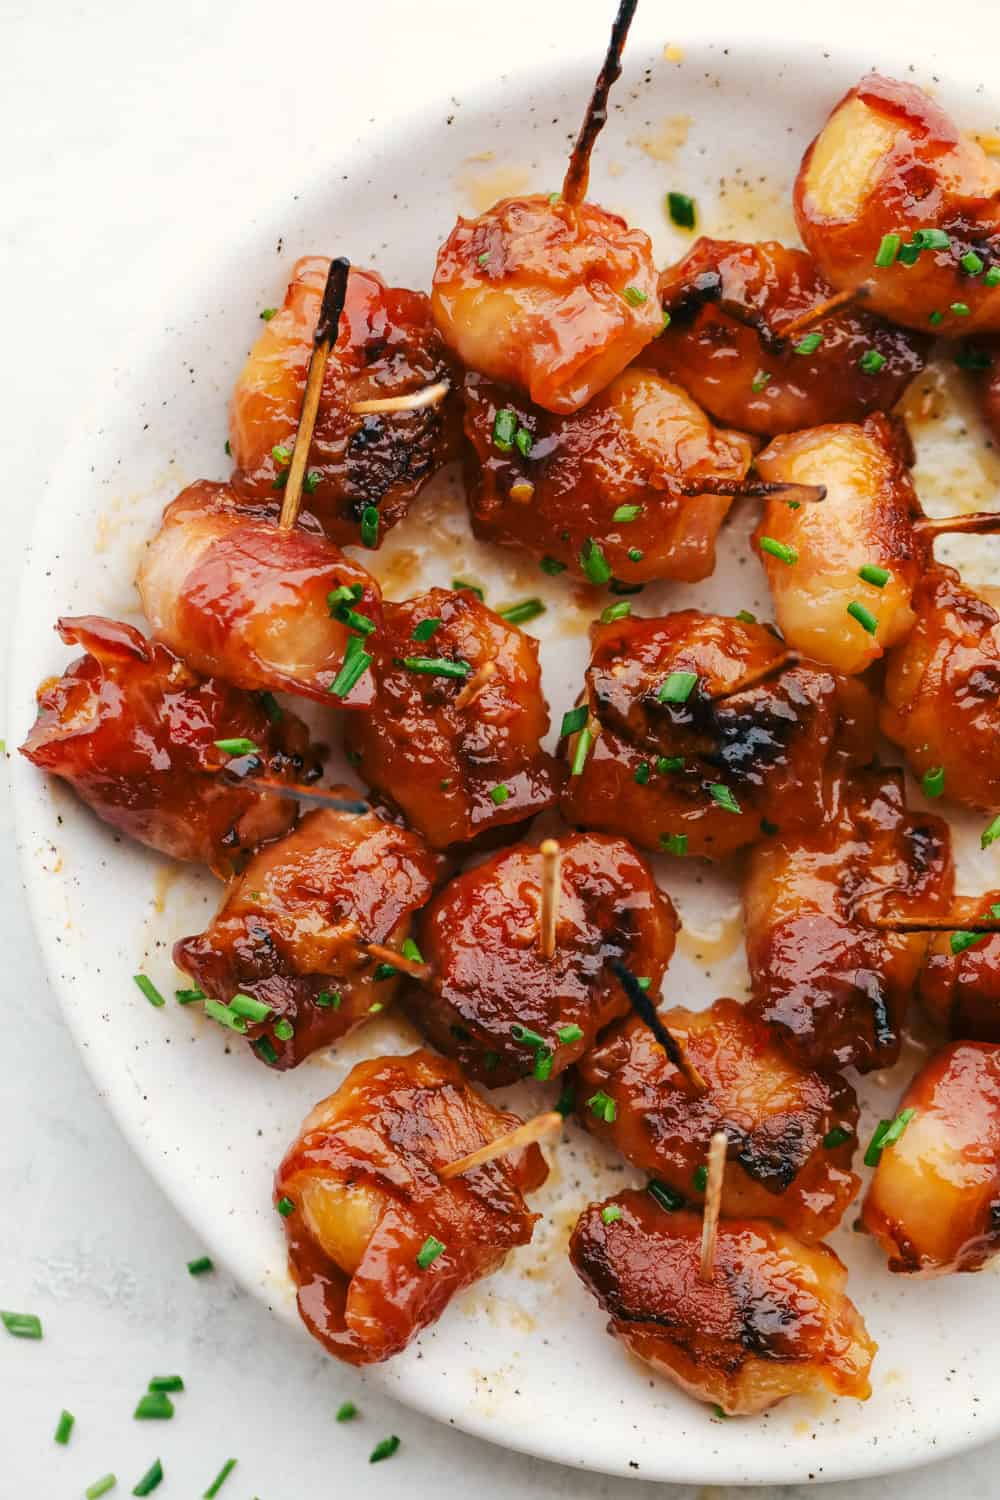 Savory bacon wraps crunchy chestnuts in a sweet spicy sauce.